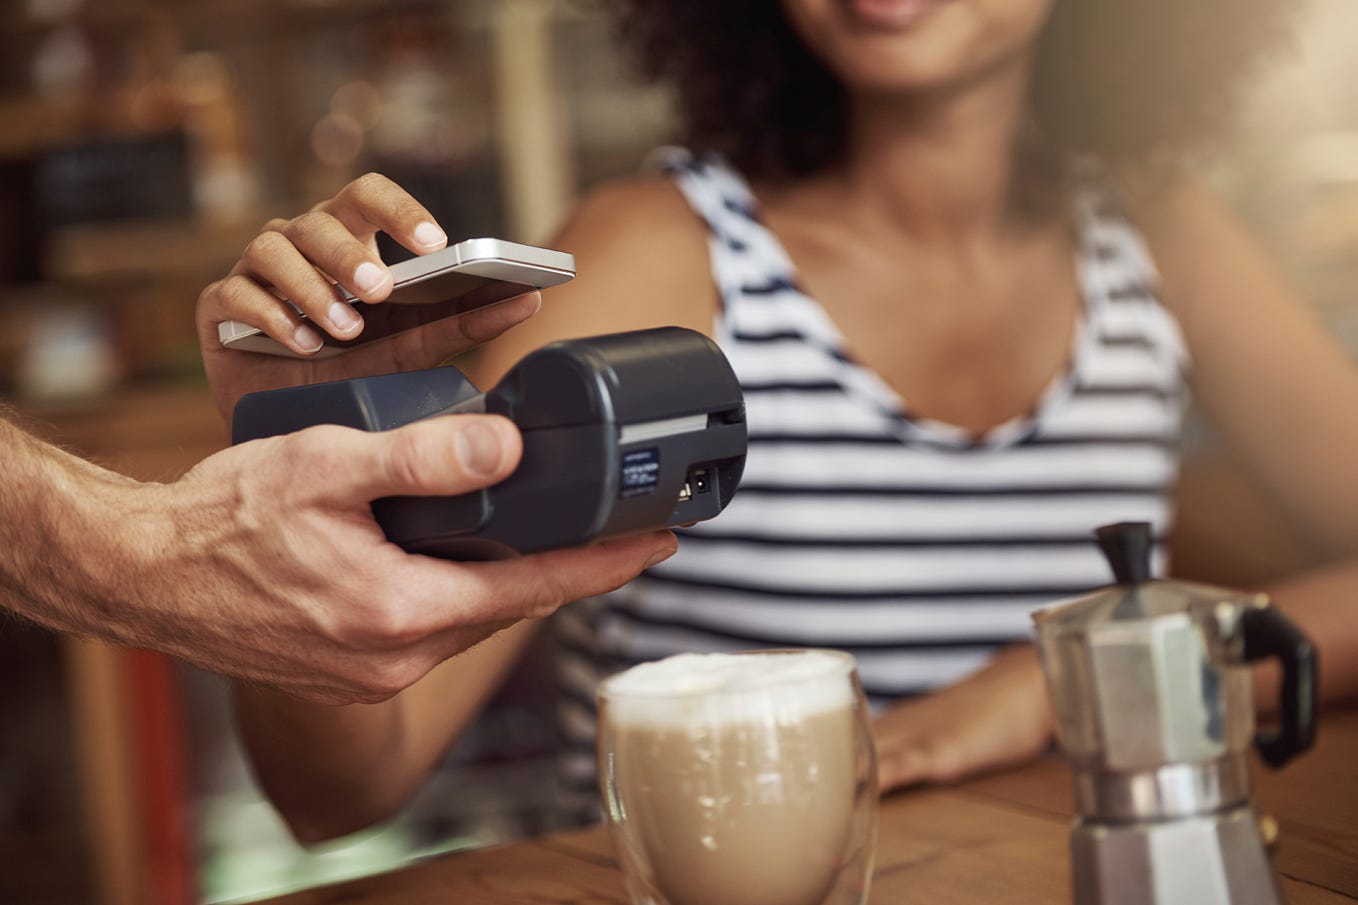 Here’s why Apple Pay will make you spend more.